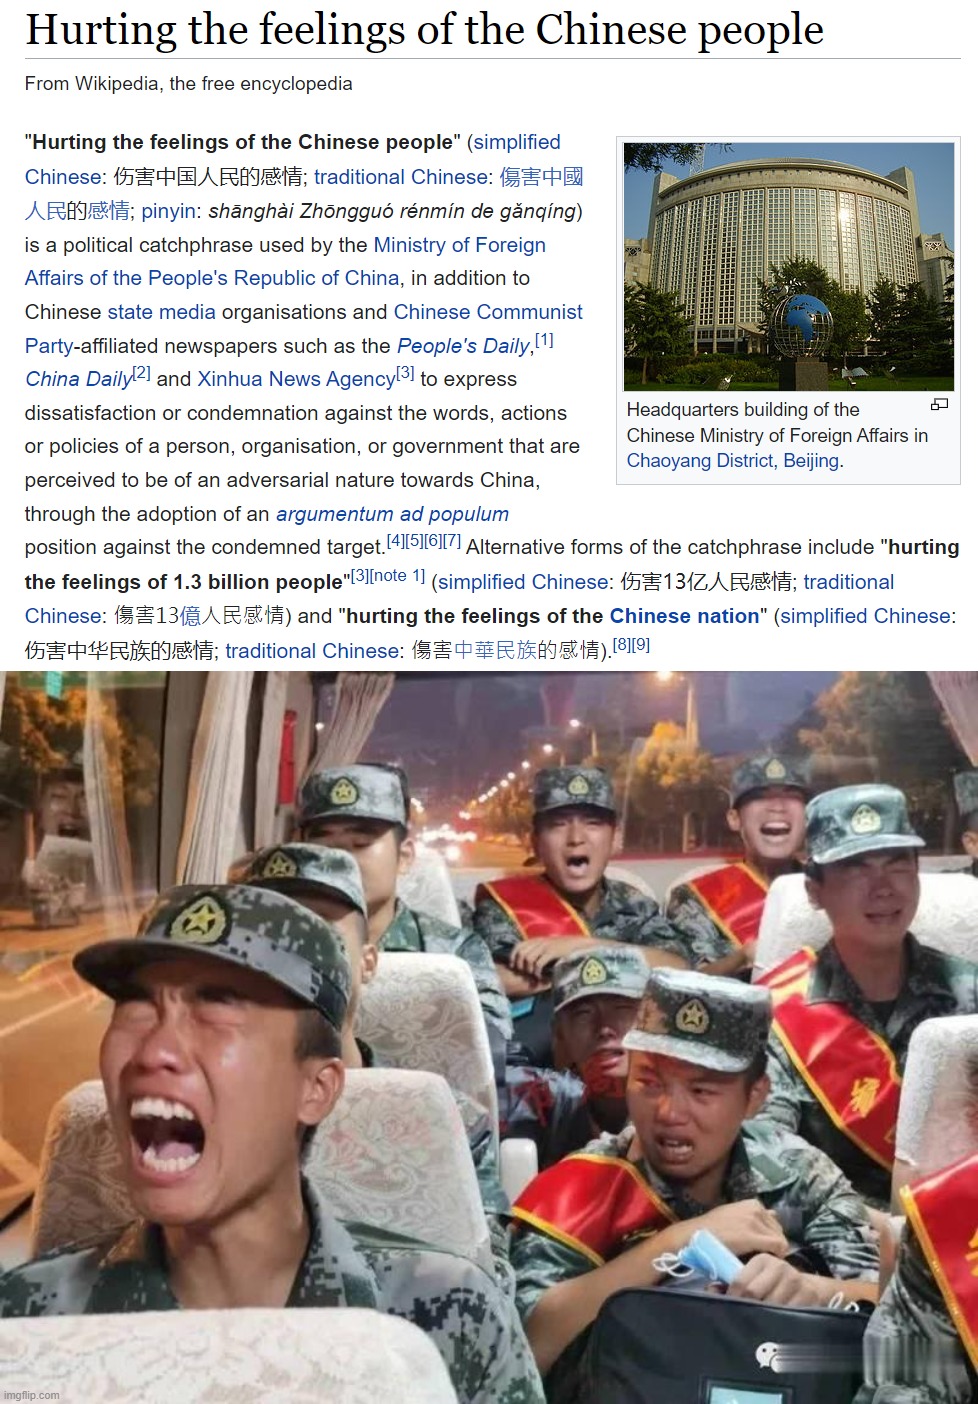 LOL who else feels like "hurting the feelings of 1.3 billion people" today | image tagged in hurting the feelings of the chinese people,crybaby chinese soldiers,china,chinese,censorship,cancel culture | made w/ Imgflip meme maker